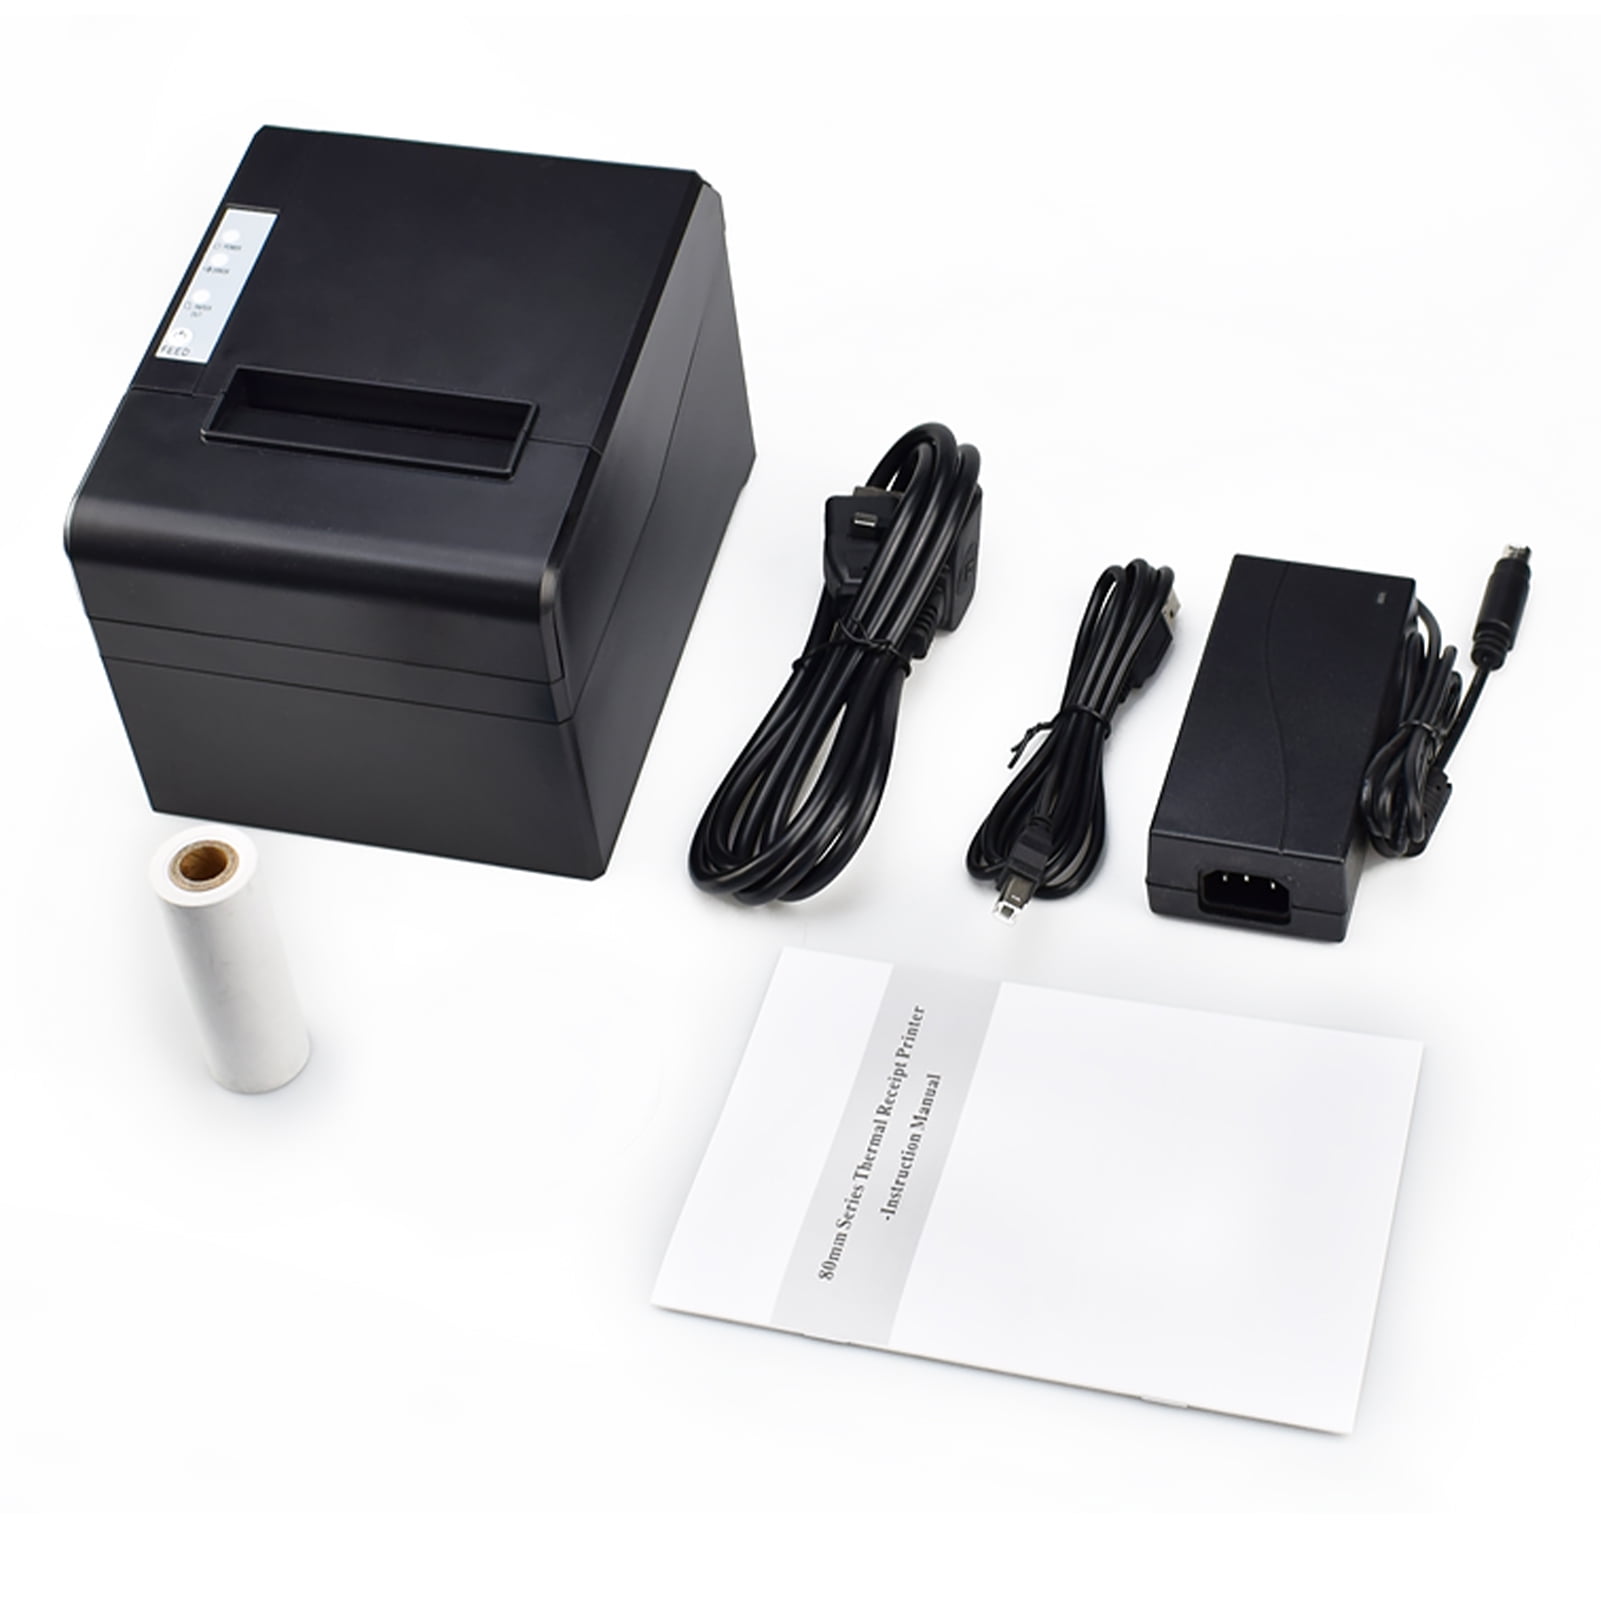 Thermal Receipt 80mm Desktop Direct Thermal Printing USB Connection 300mm/s High Speed with Auto Cutter Support ESC/POS for Shipping Business Restaurant Kitchen Supermarket Hom - Walmart.com